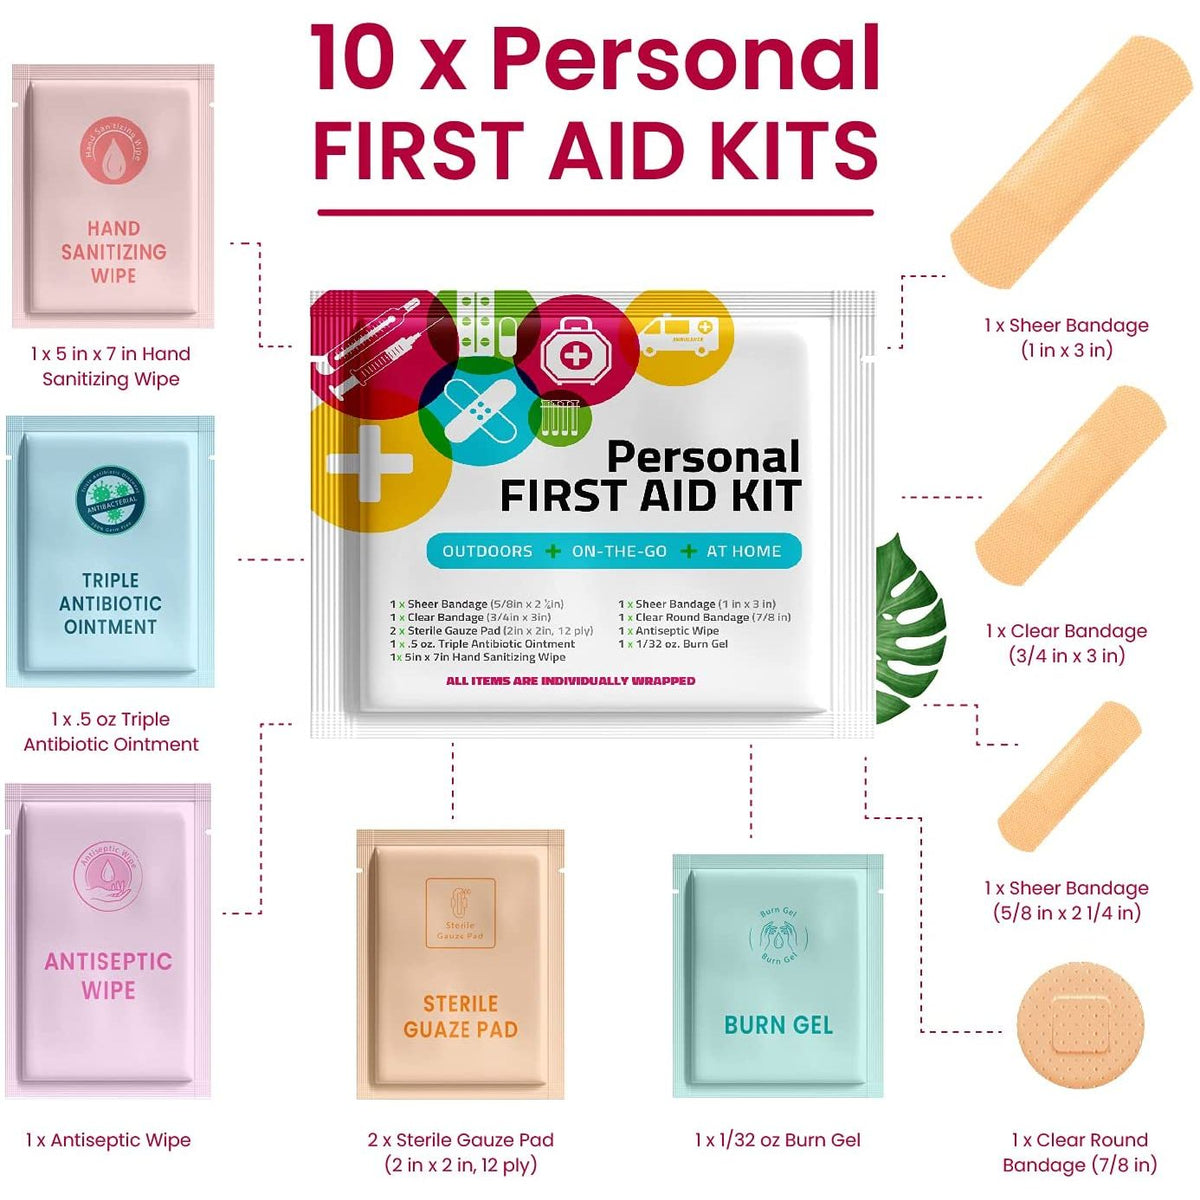 Portable Travel Size First Aid Kit - 10 Pack | Perfect for Home, Office, Car, School, Business, Travel, Hiking, Hunting, and Outdoors | Individually Wrapped First Aid Products (Multi-Color) by Skincareheaven